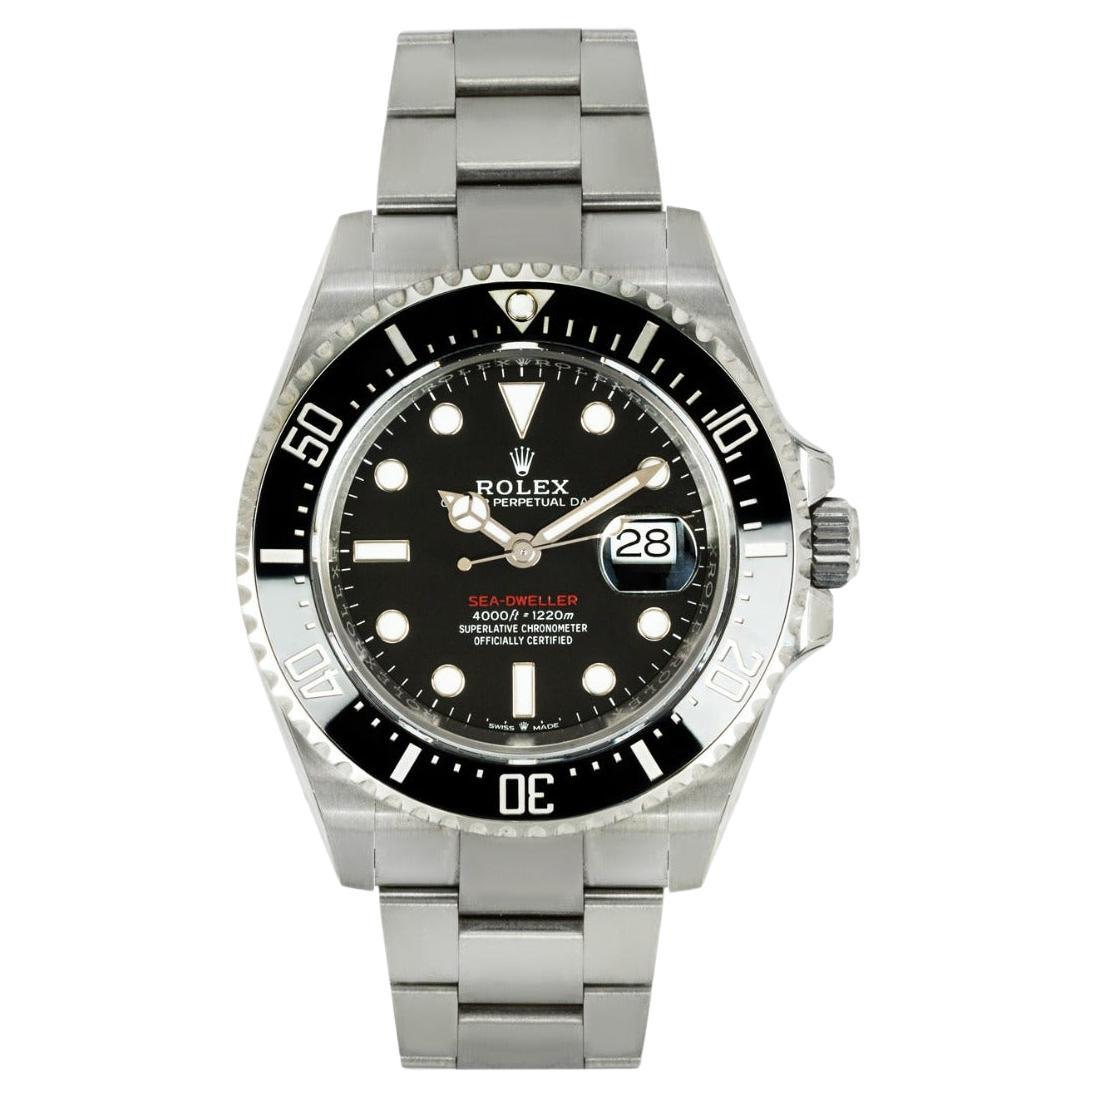 How much is a Rolex Sea Dweller?